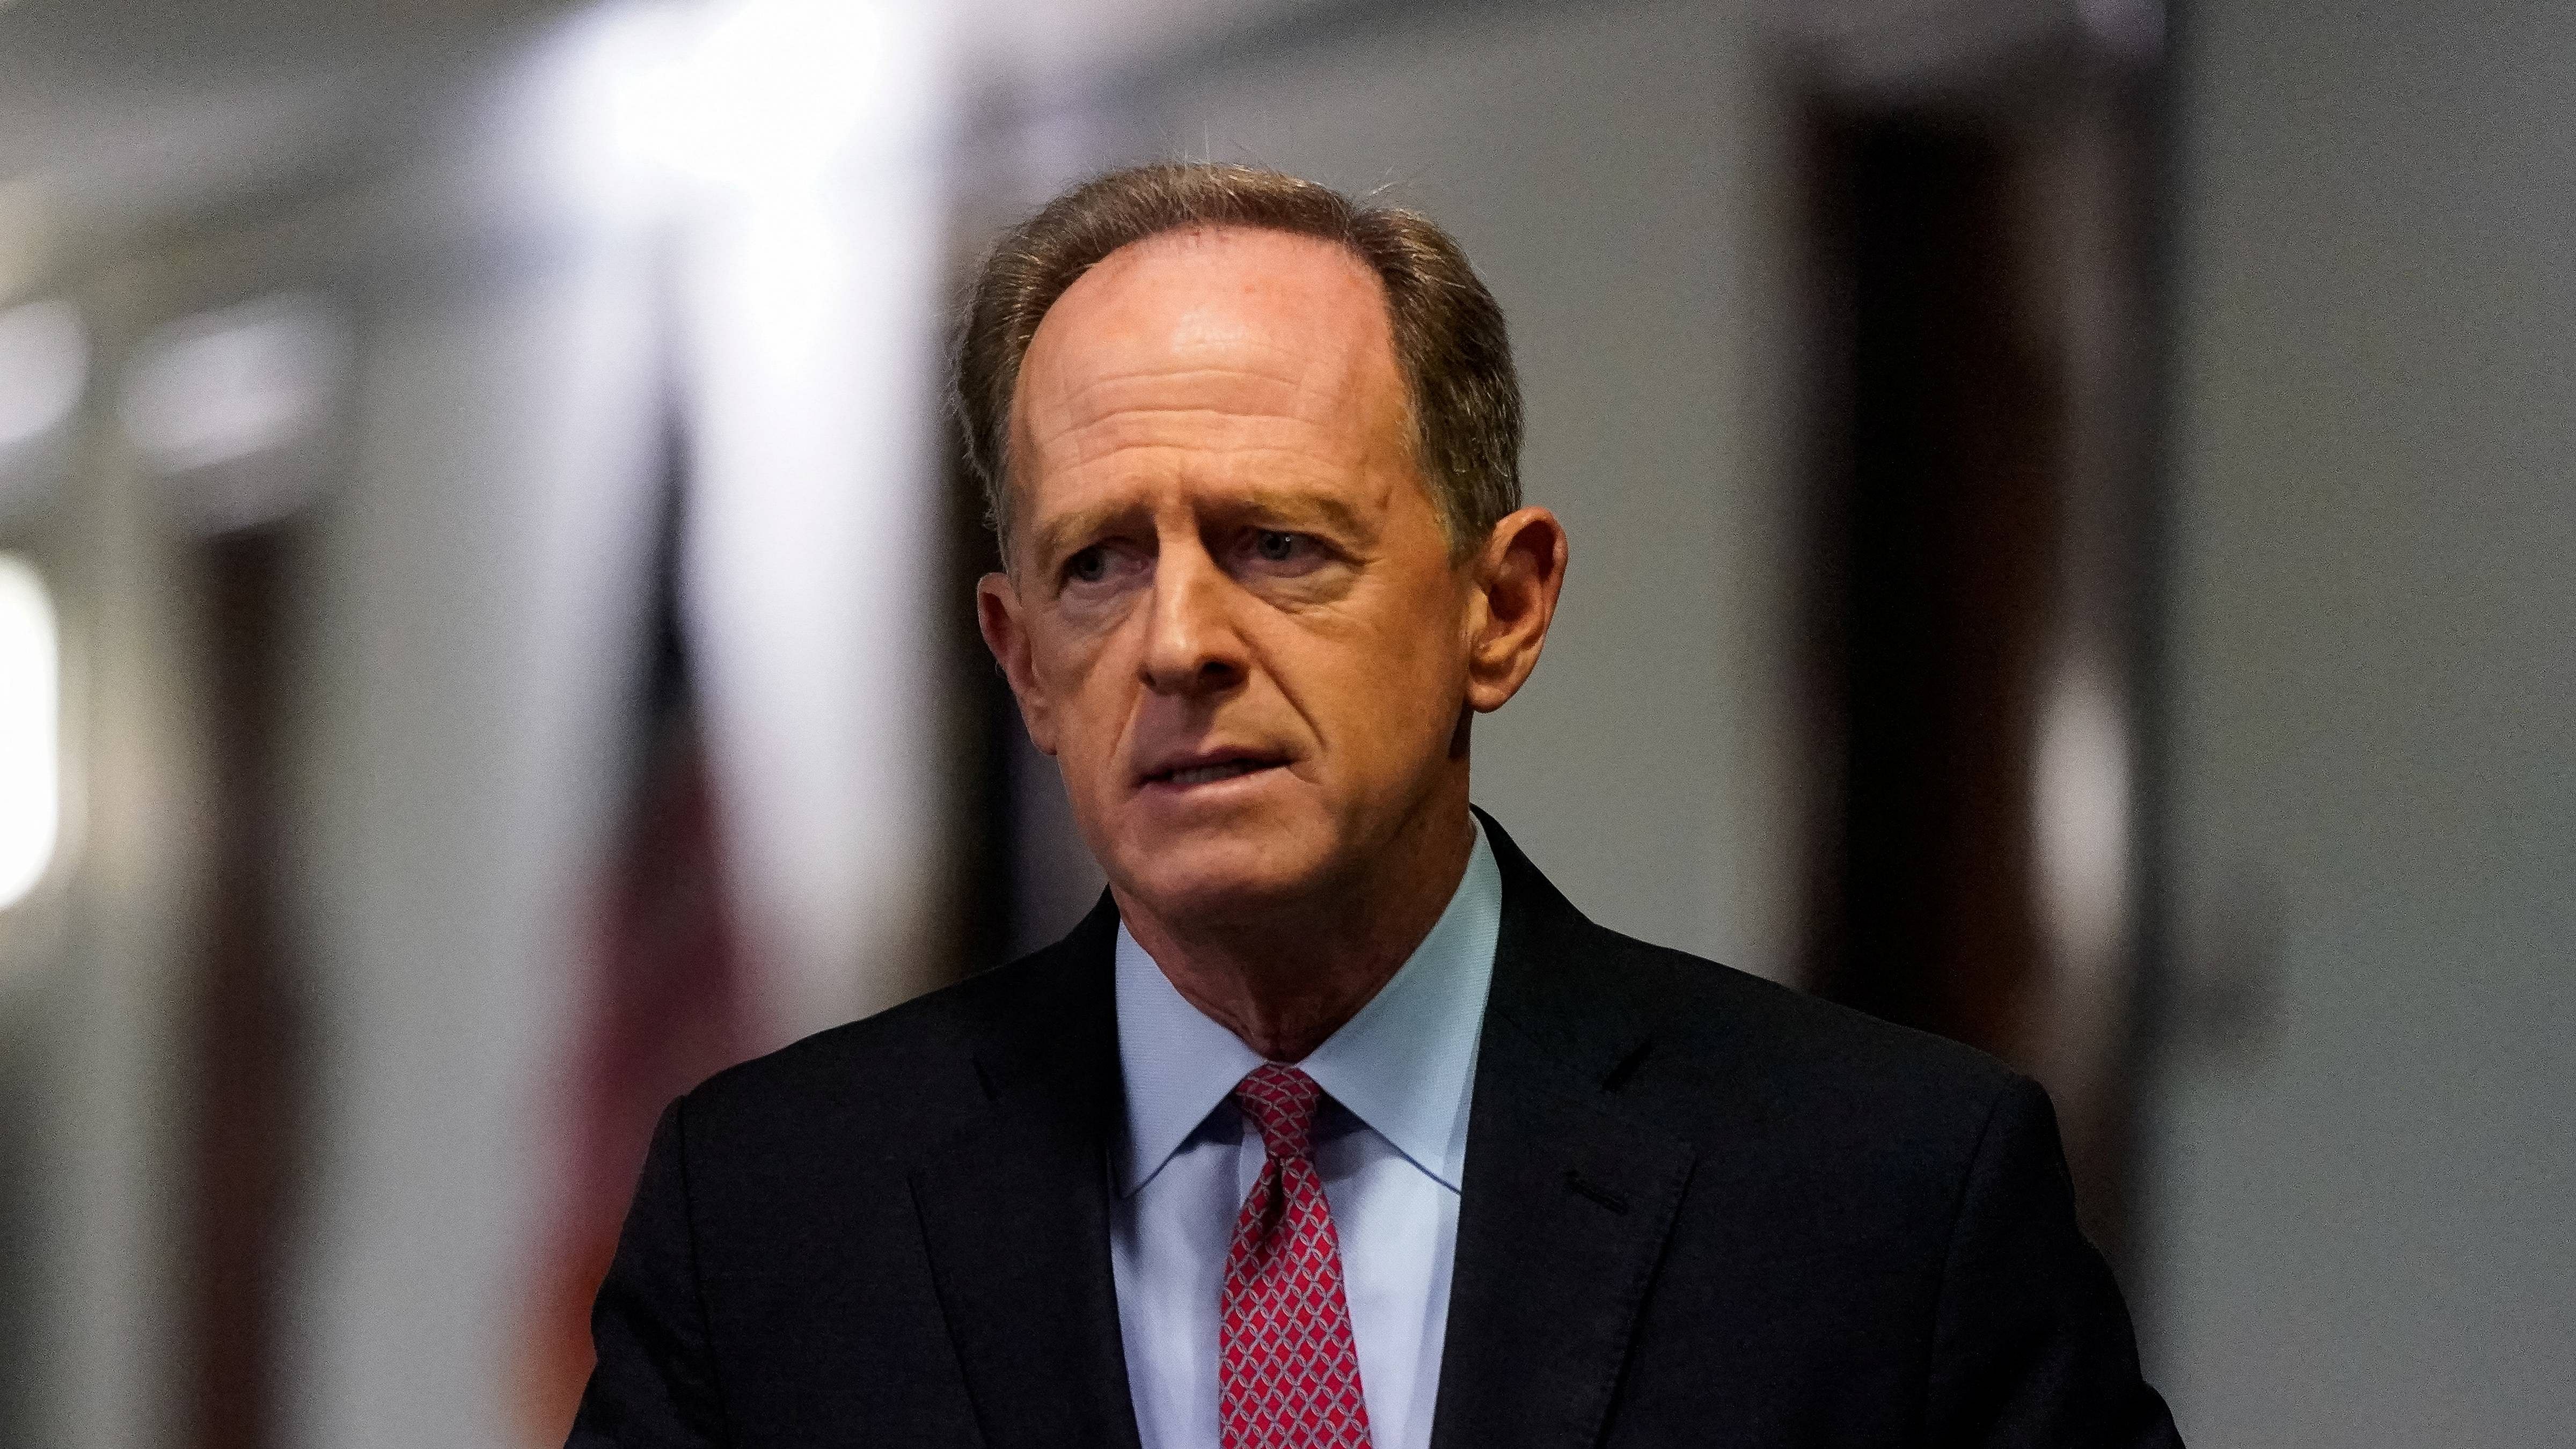 “Today we are here to remember the tragedy that commenced on November 1, 1984, following decades of ethnic tension between Sikhs in the Punjab province and the central Indian Government,” US senator Pat Toomey said.